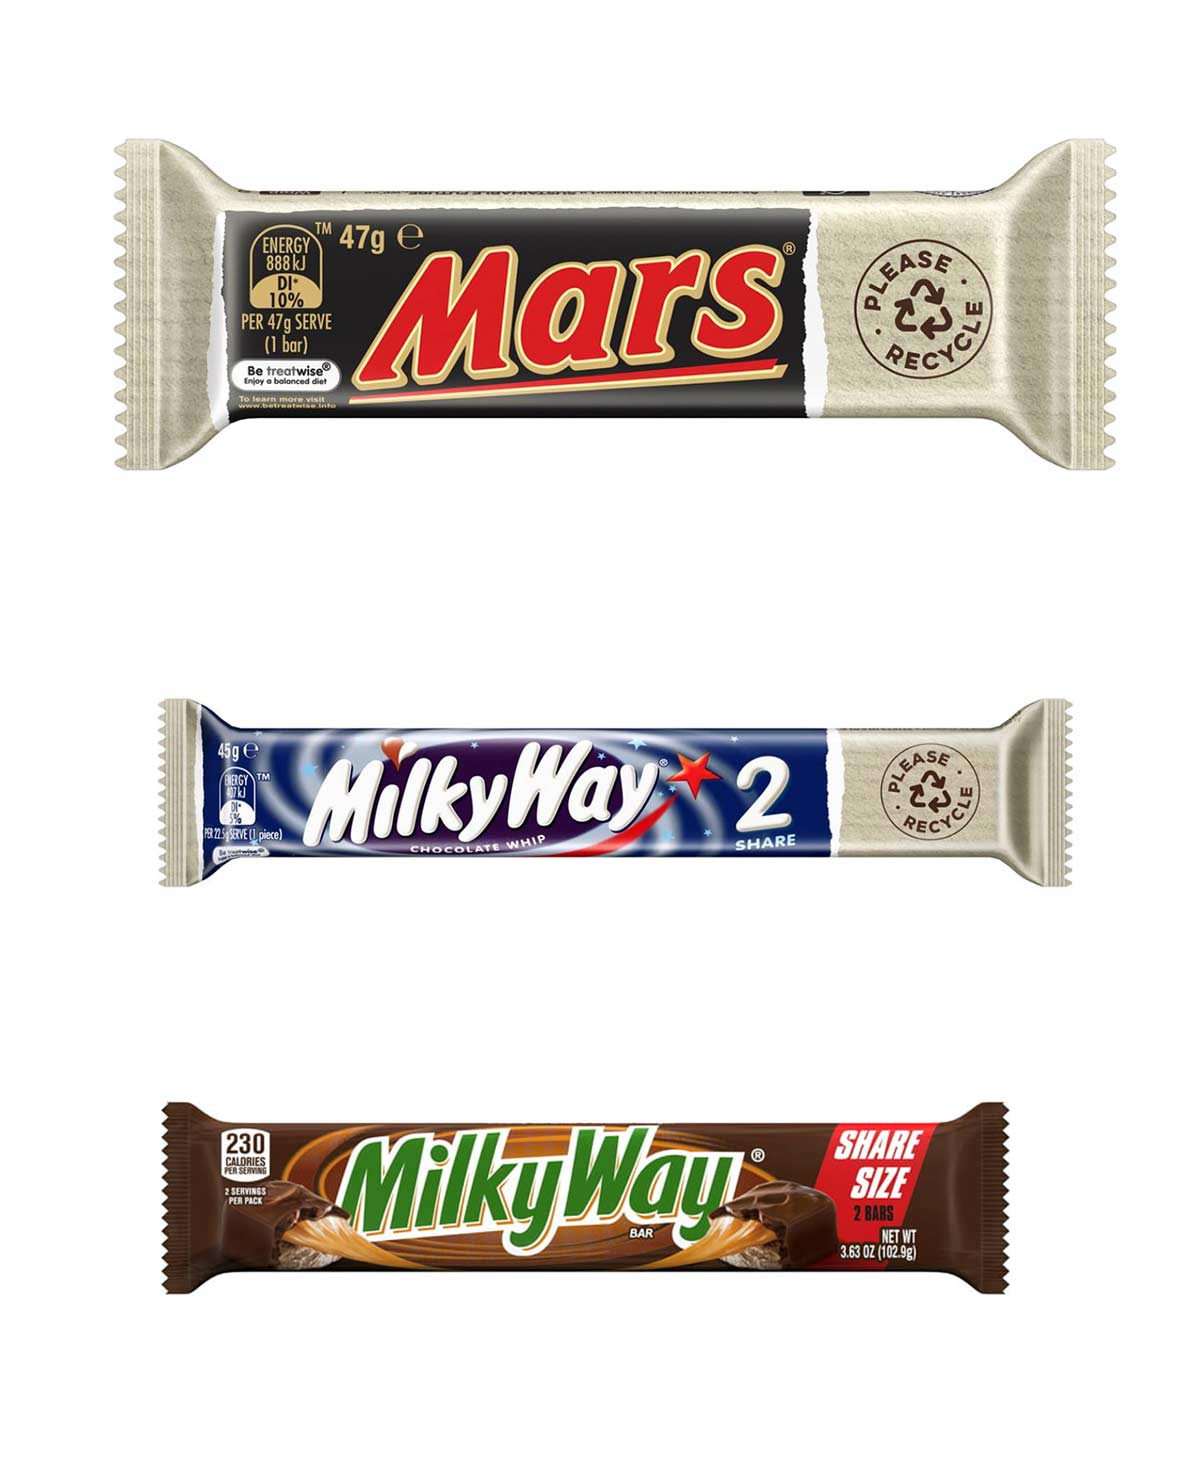 3 bars of chocolate showing the different mars bar and Milky Way chocolate bars